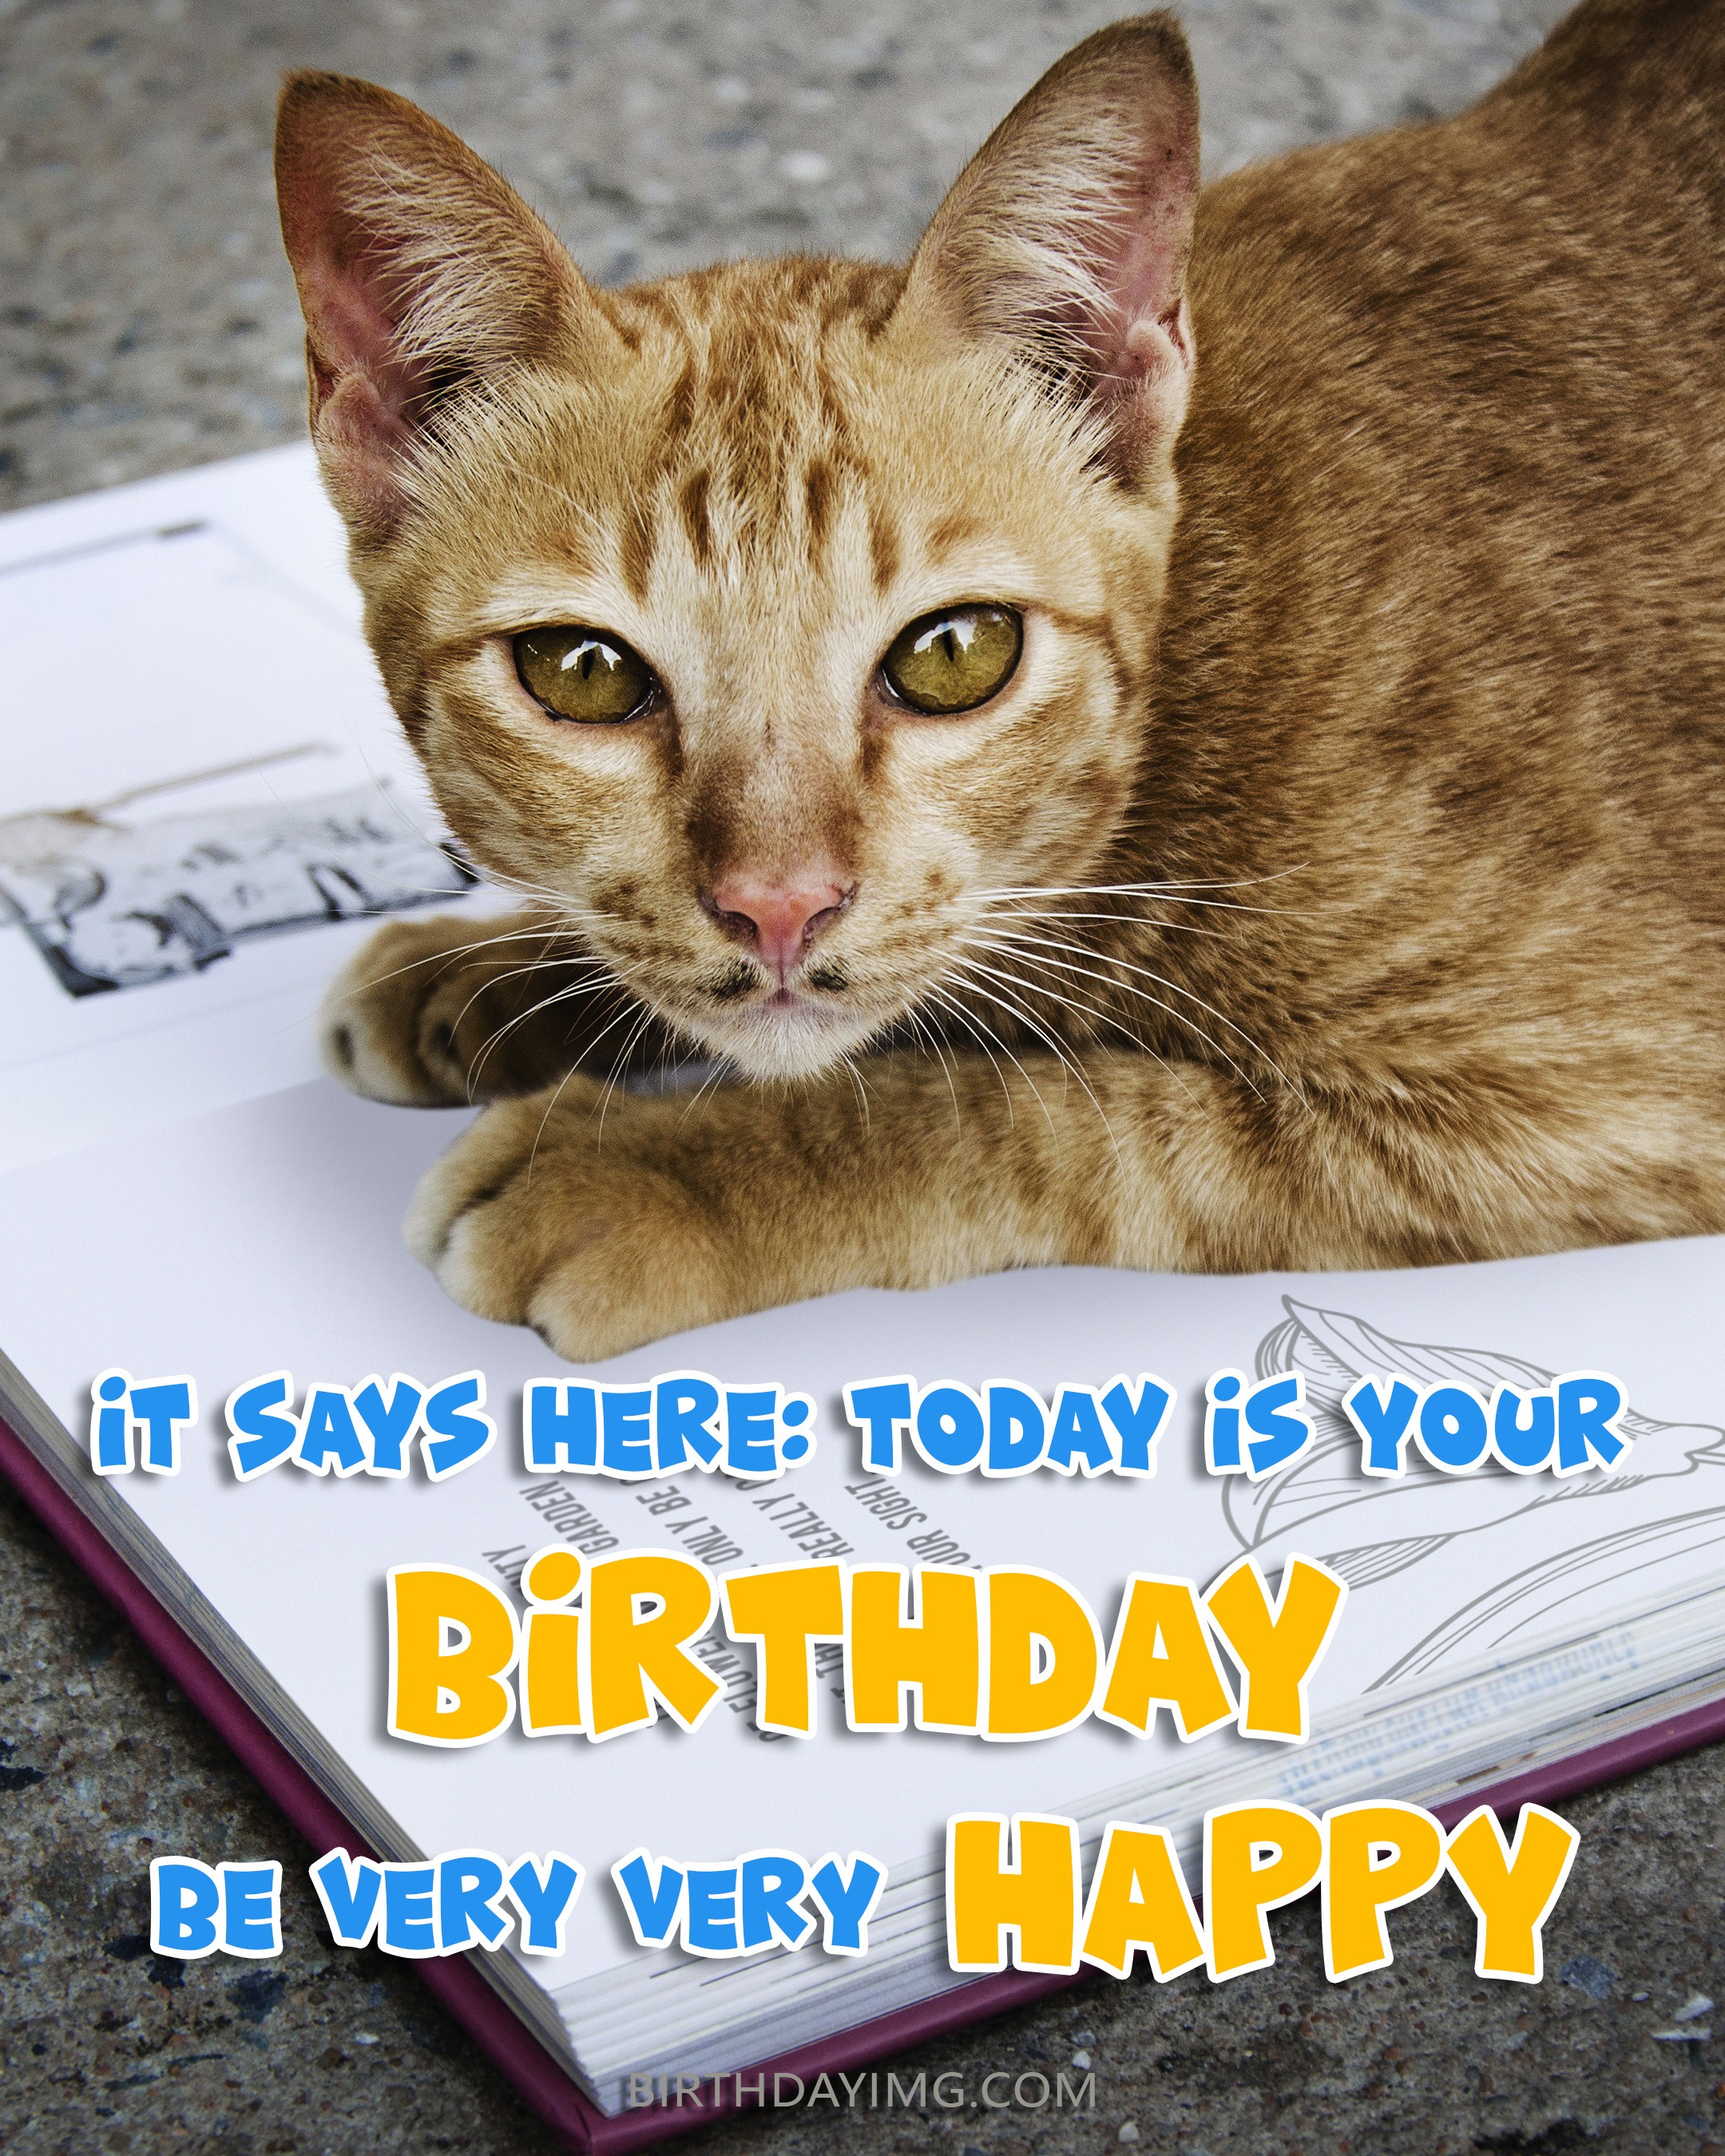 Free Funny Happy Birthday Image With Cute Red Cat - birthdayimg.com